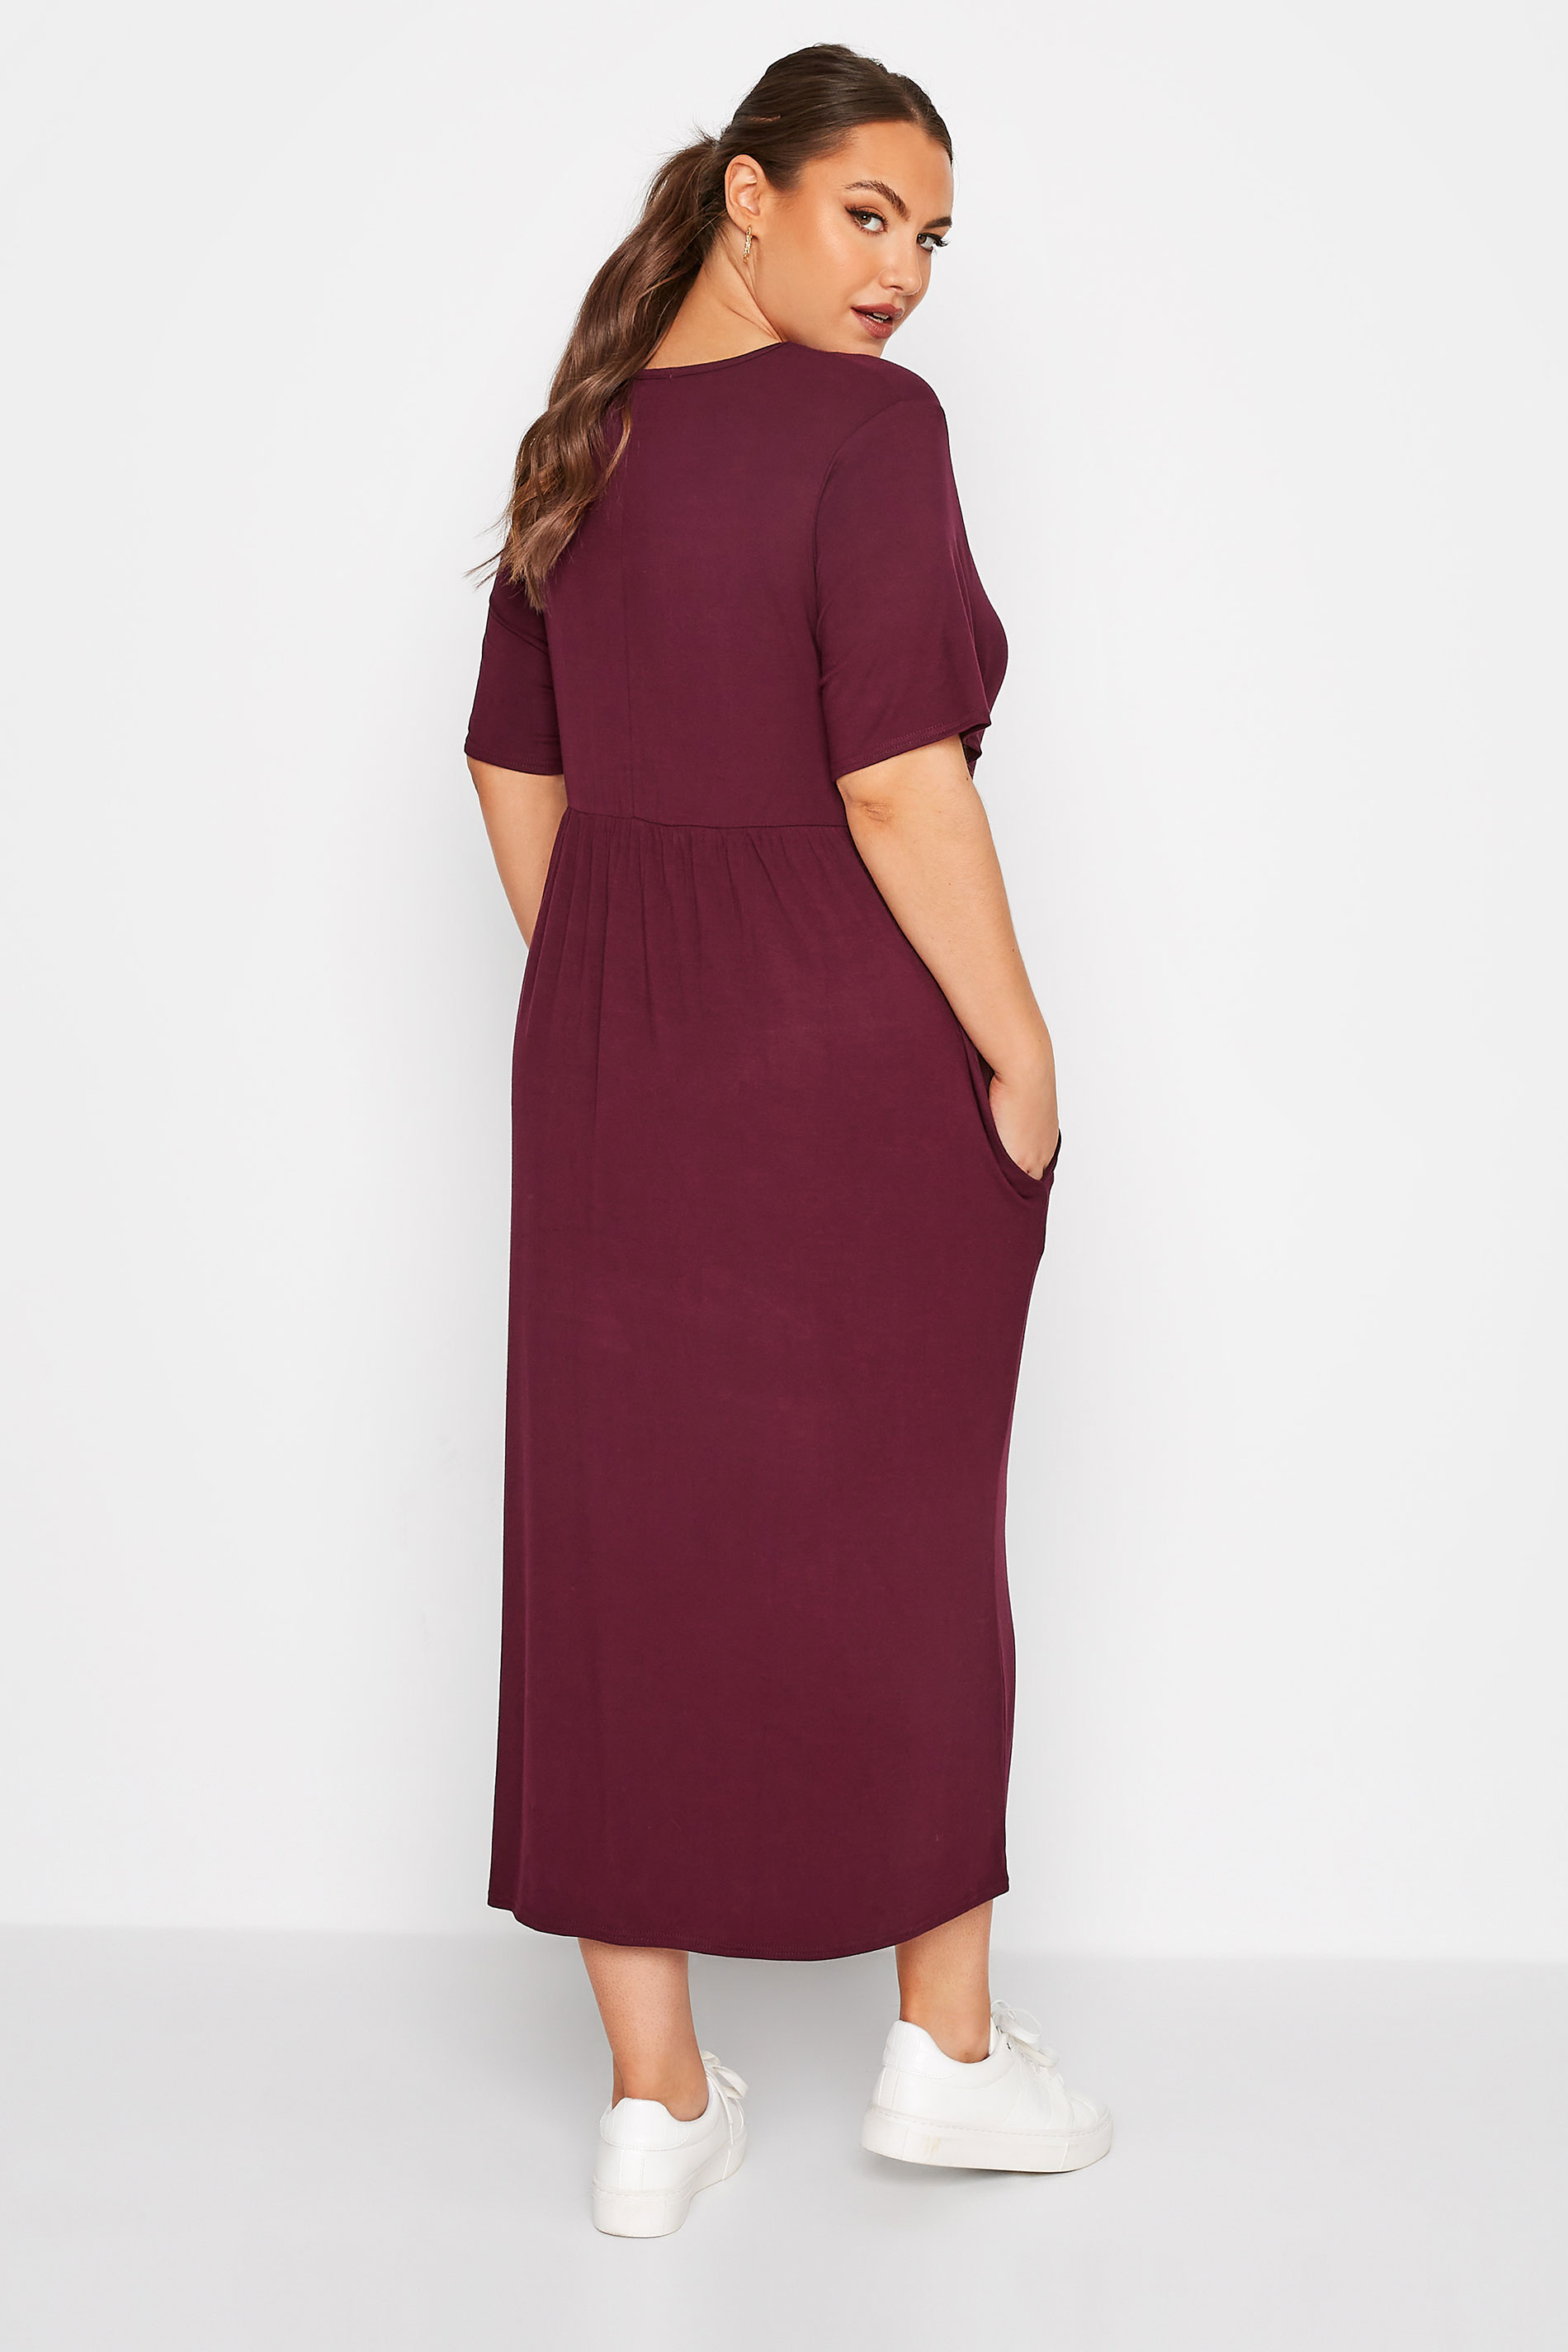 LIMITED COLLECTION Plus Size Plum Purple Throw On Maxi Dress | Yours Clothing 3